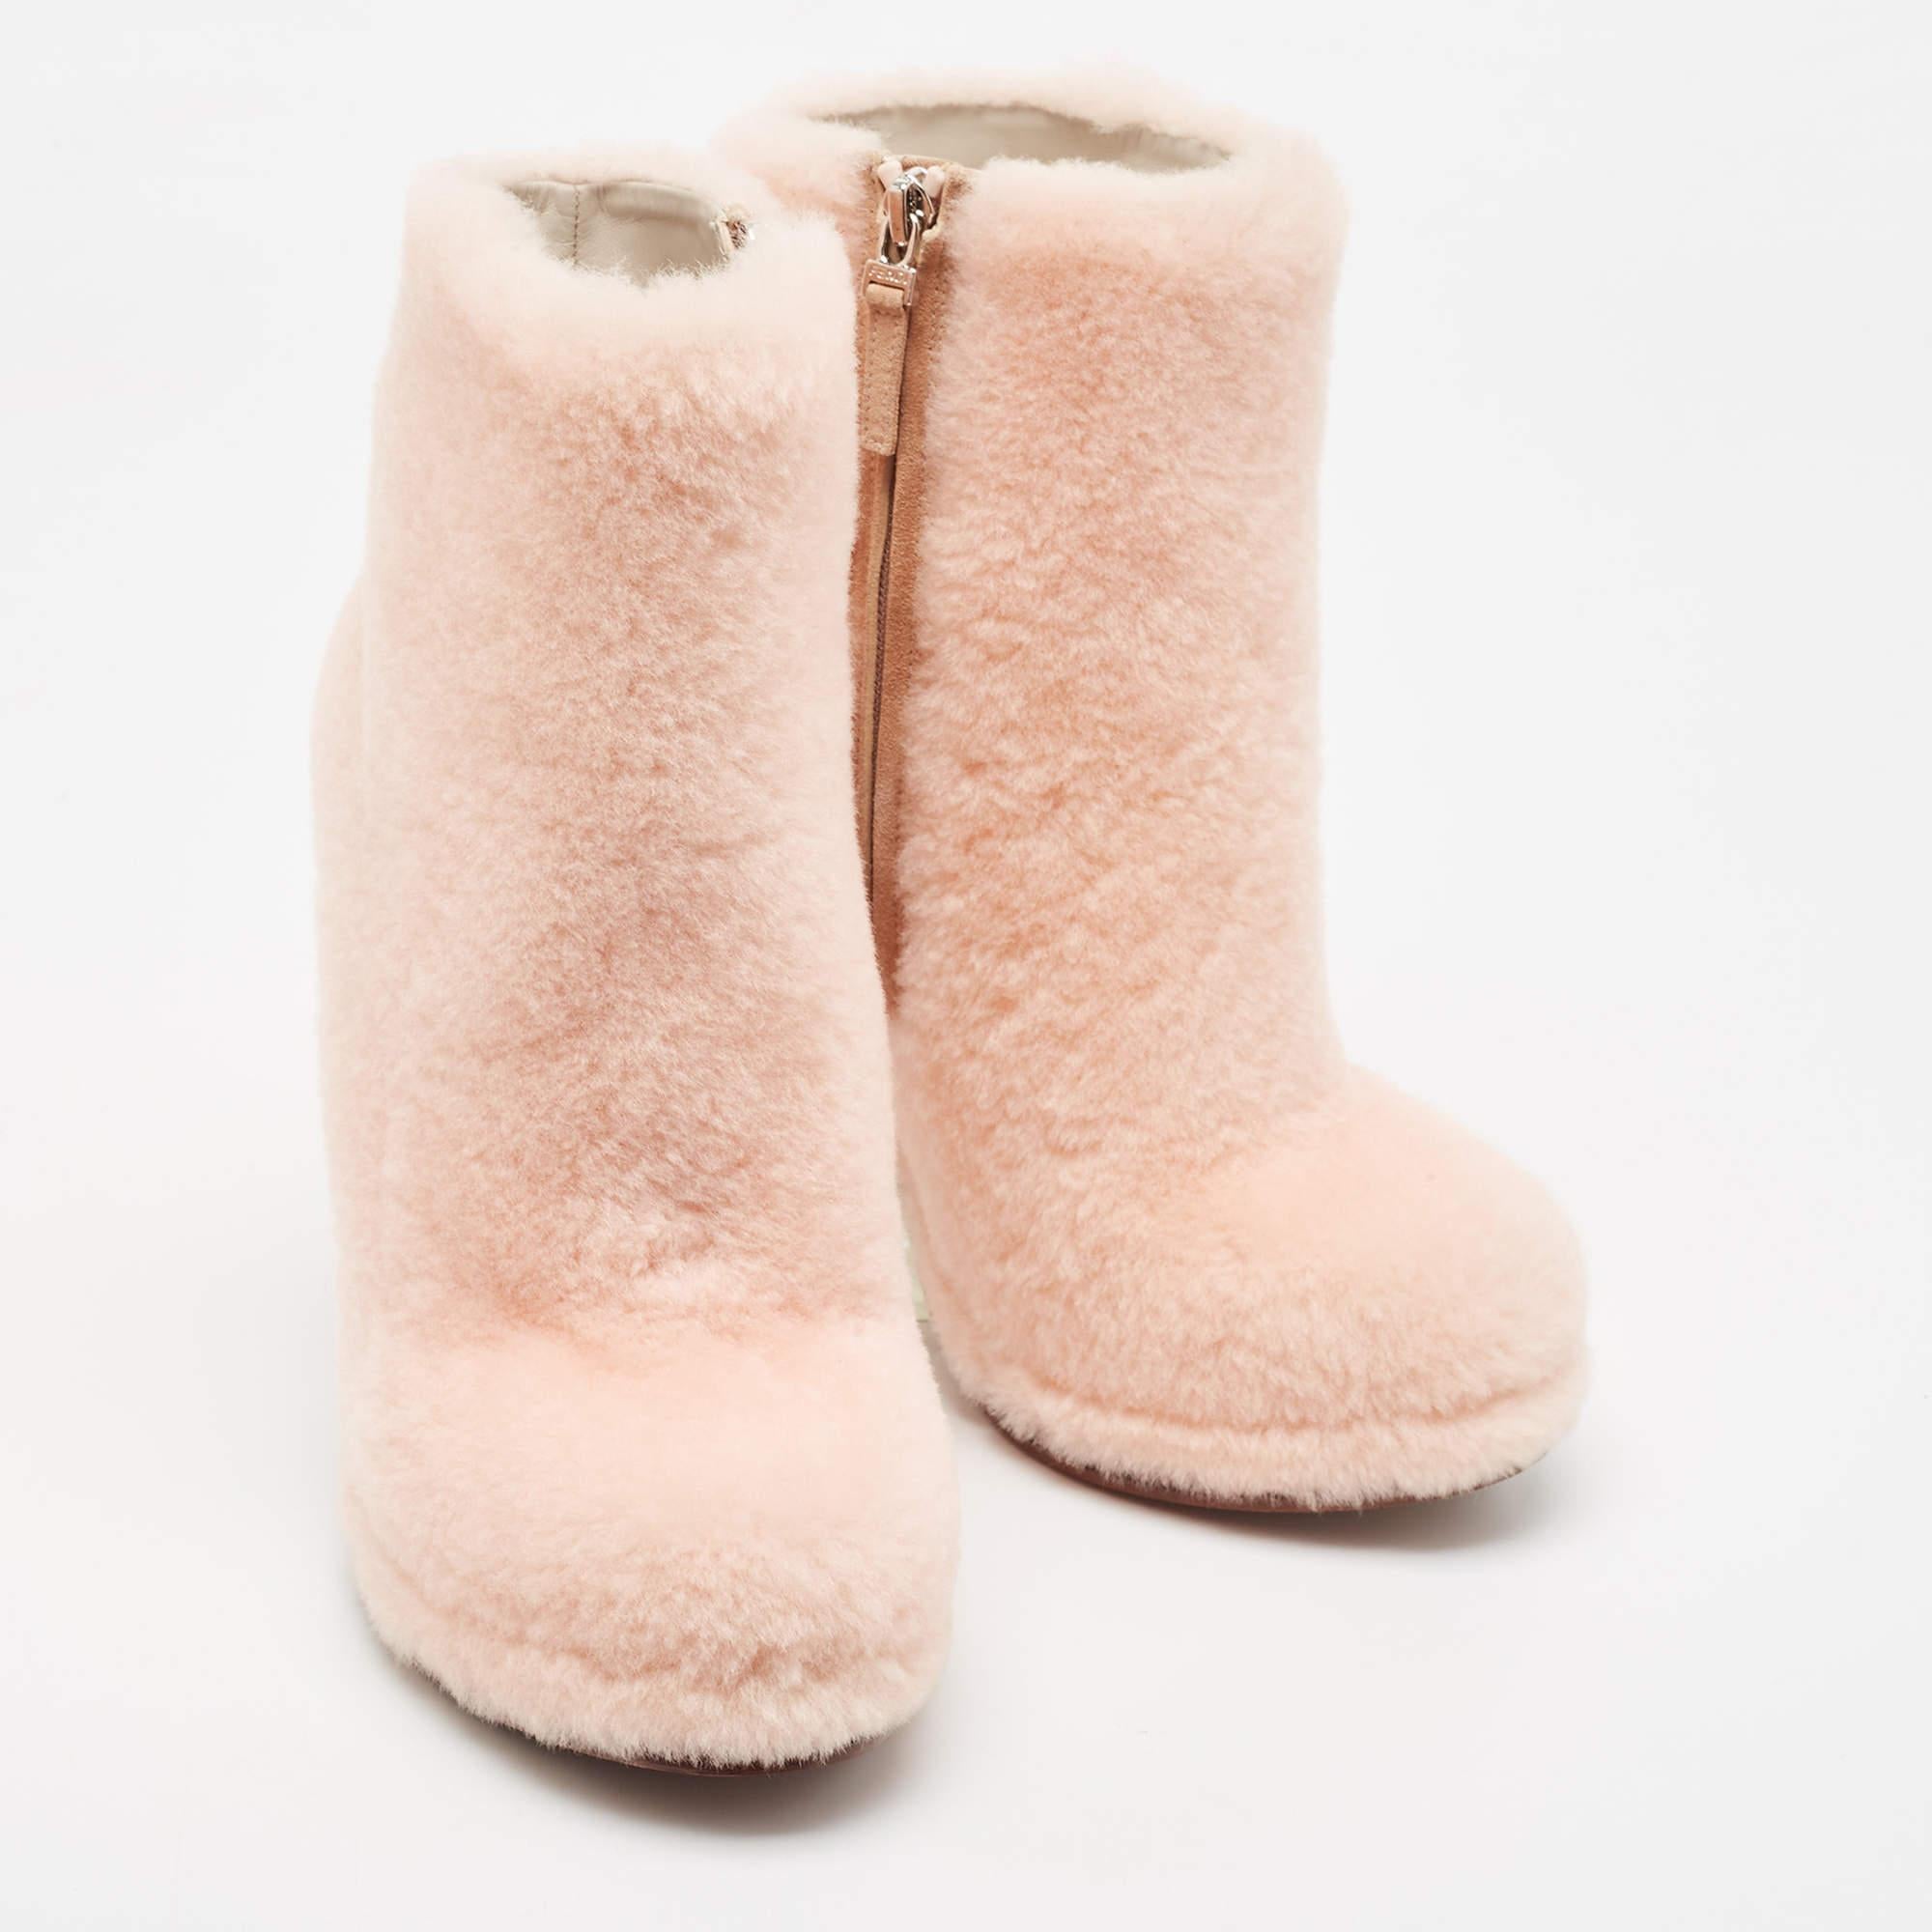 Fendi Light Pink Shearling Ice Heel Ankle Boots Size 38 In New Condition For Sale In Dubai, Al Qouz 2